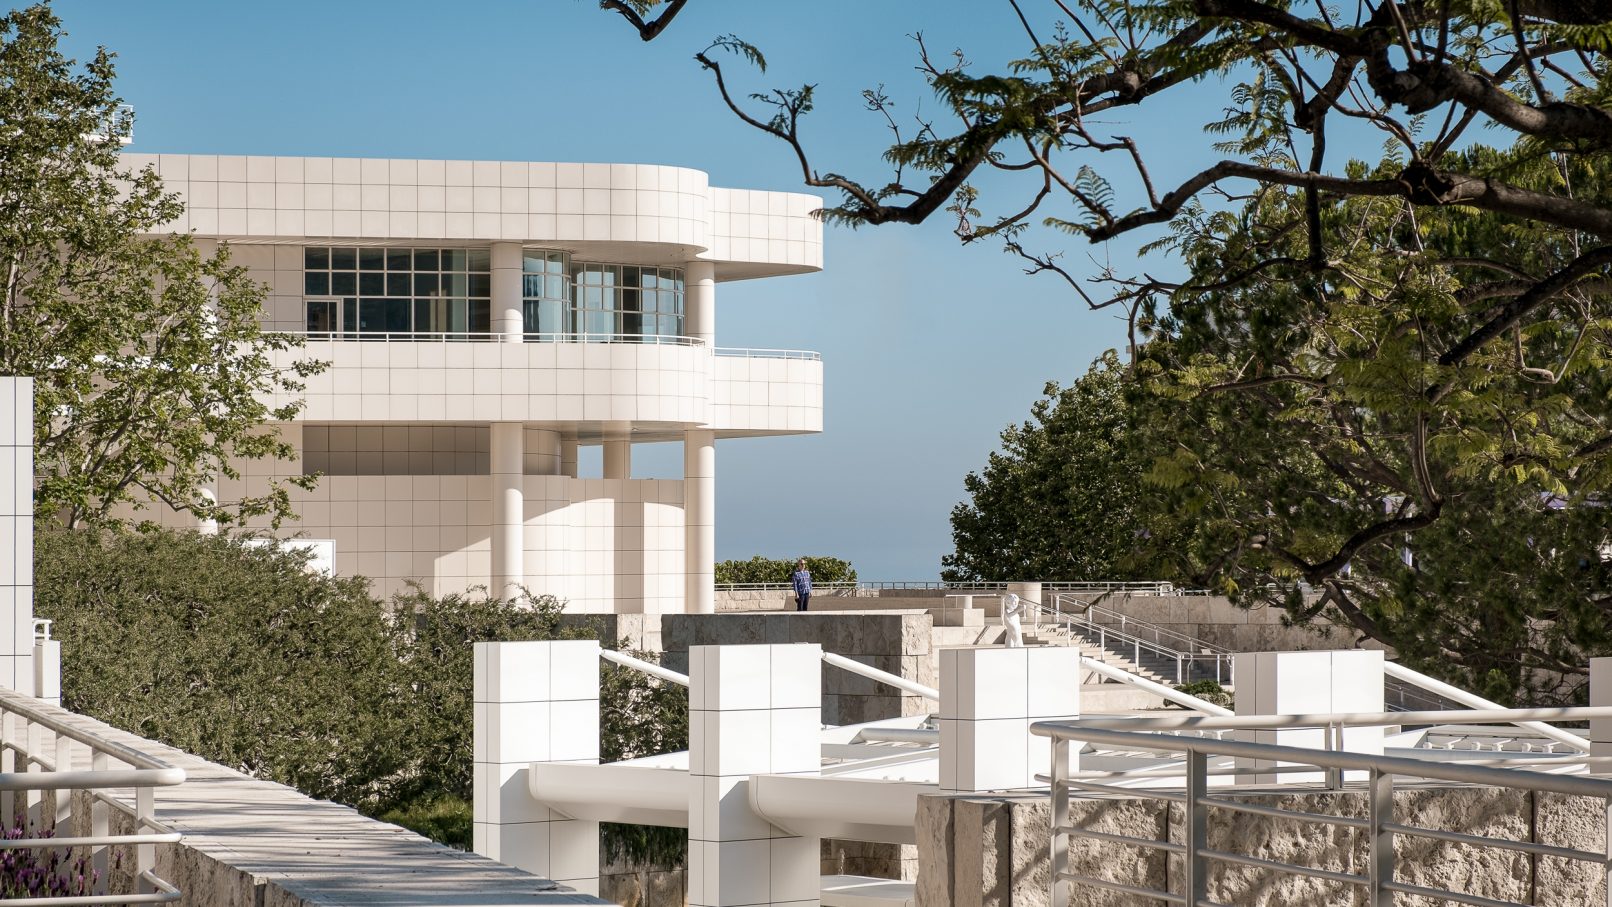 Architectural Photograph of the Getty Center in Los Angeles designed by Richard Meier and Partners featuring a long a shot back towards the main Getty Center building just above where the tram departs framed by the long branches of a tree with only a single onlooker in the shot